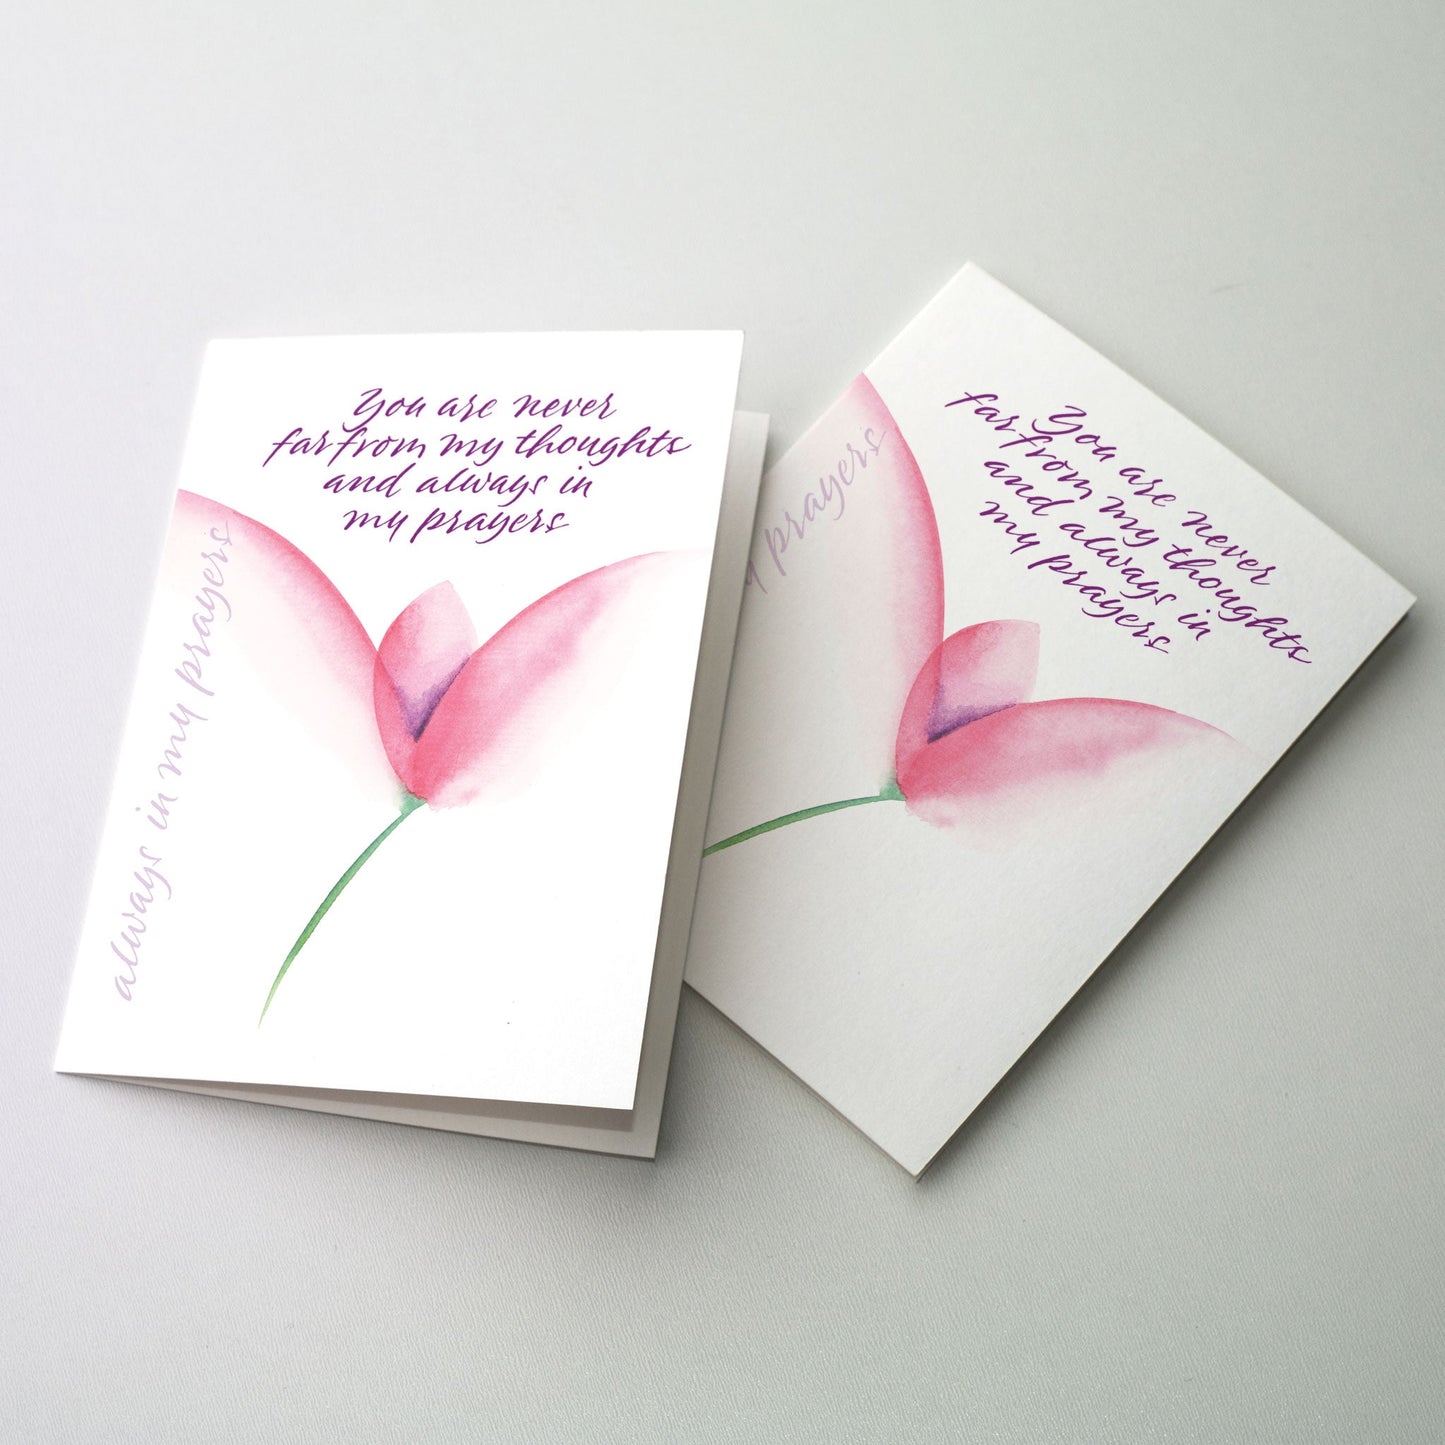 Express your thoughts of concern and prayer in calligraphy accented by a dark pink flower. The cards measure 5&quot; x 7&quot;. Printed on recycled paper.